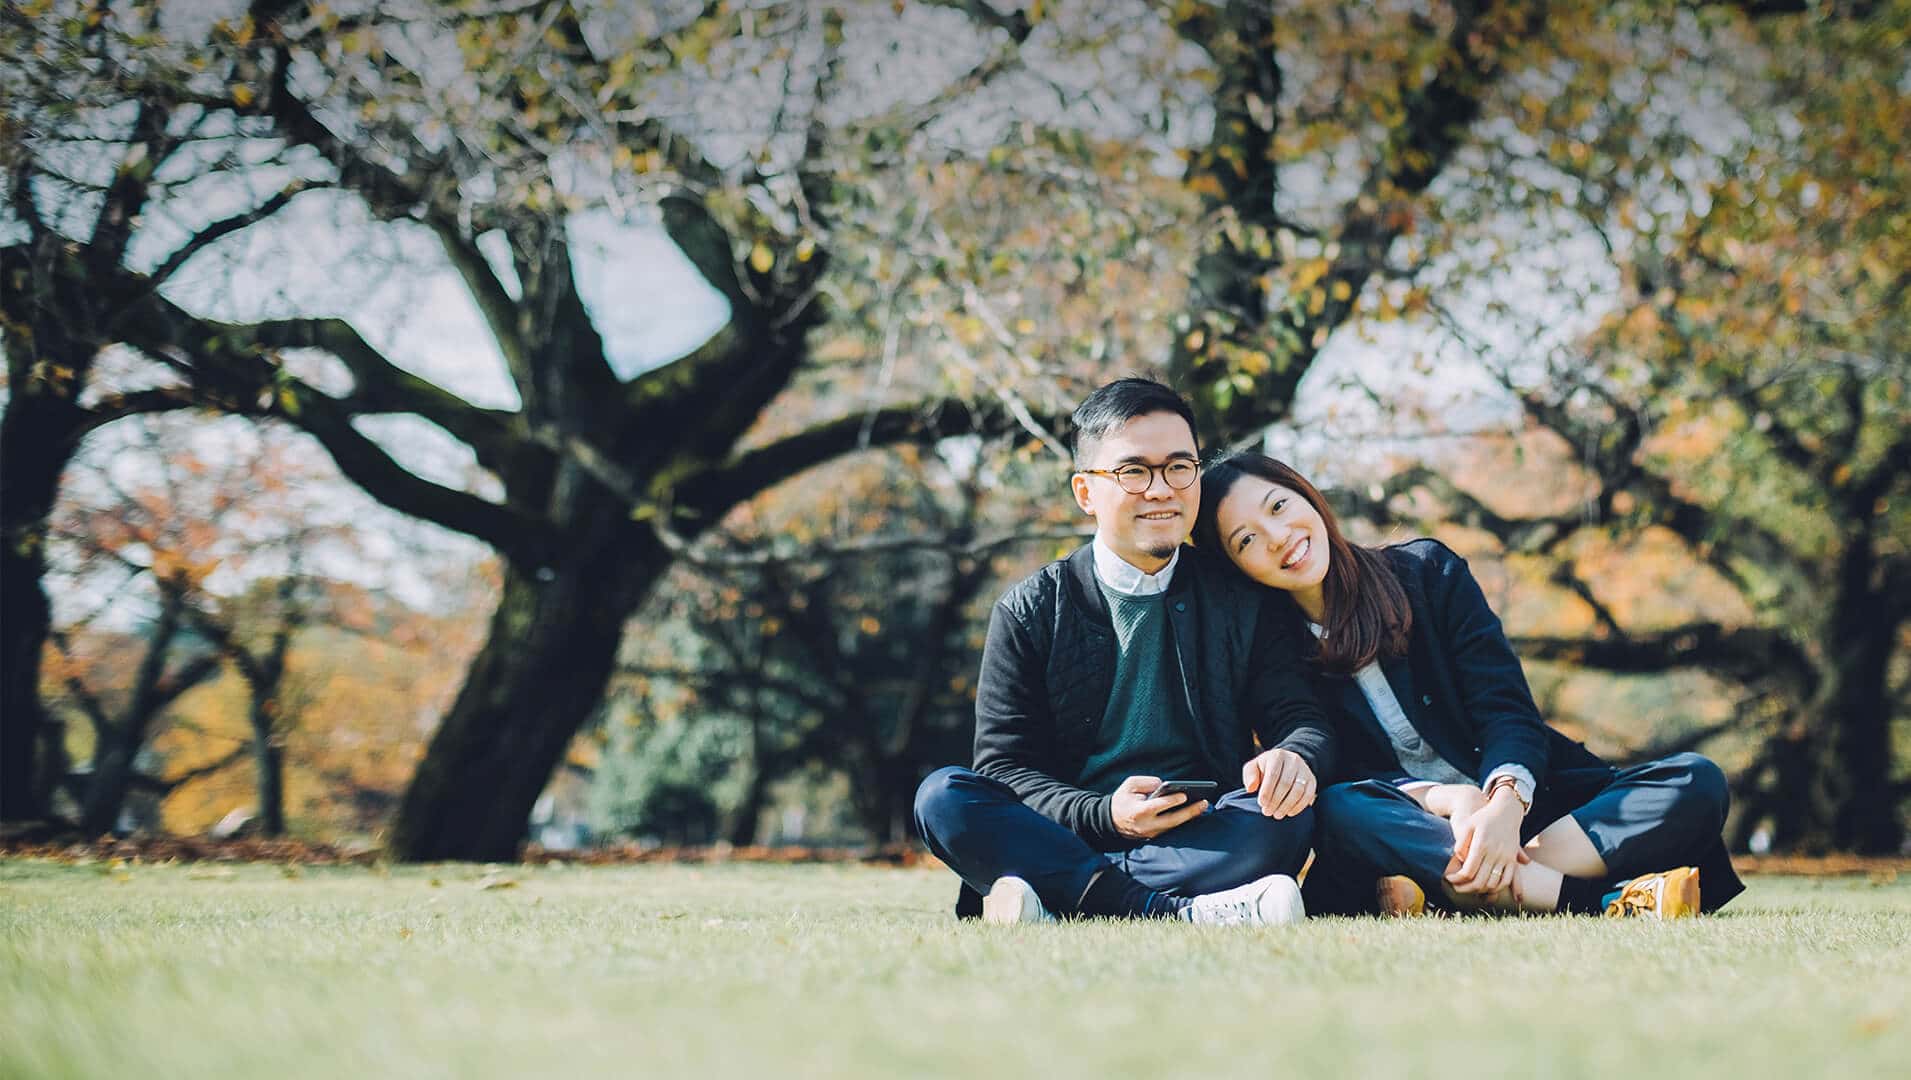 Japanese dating symbolized by a man and woman sitting cross-legged next to each other on a green field in Australia